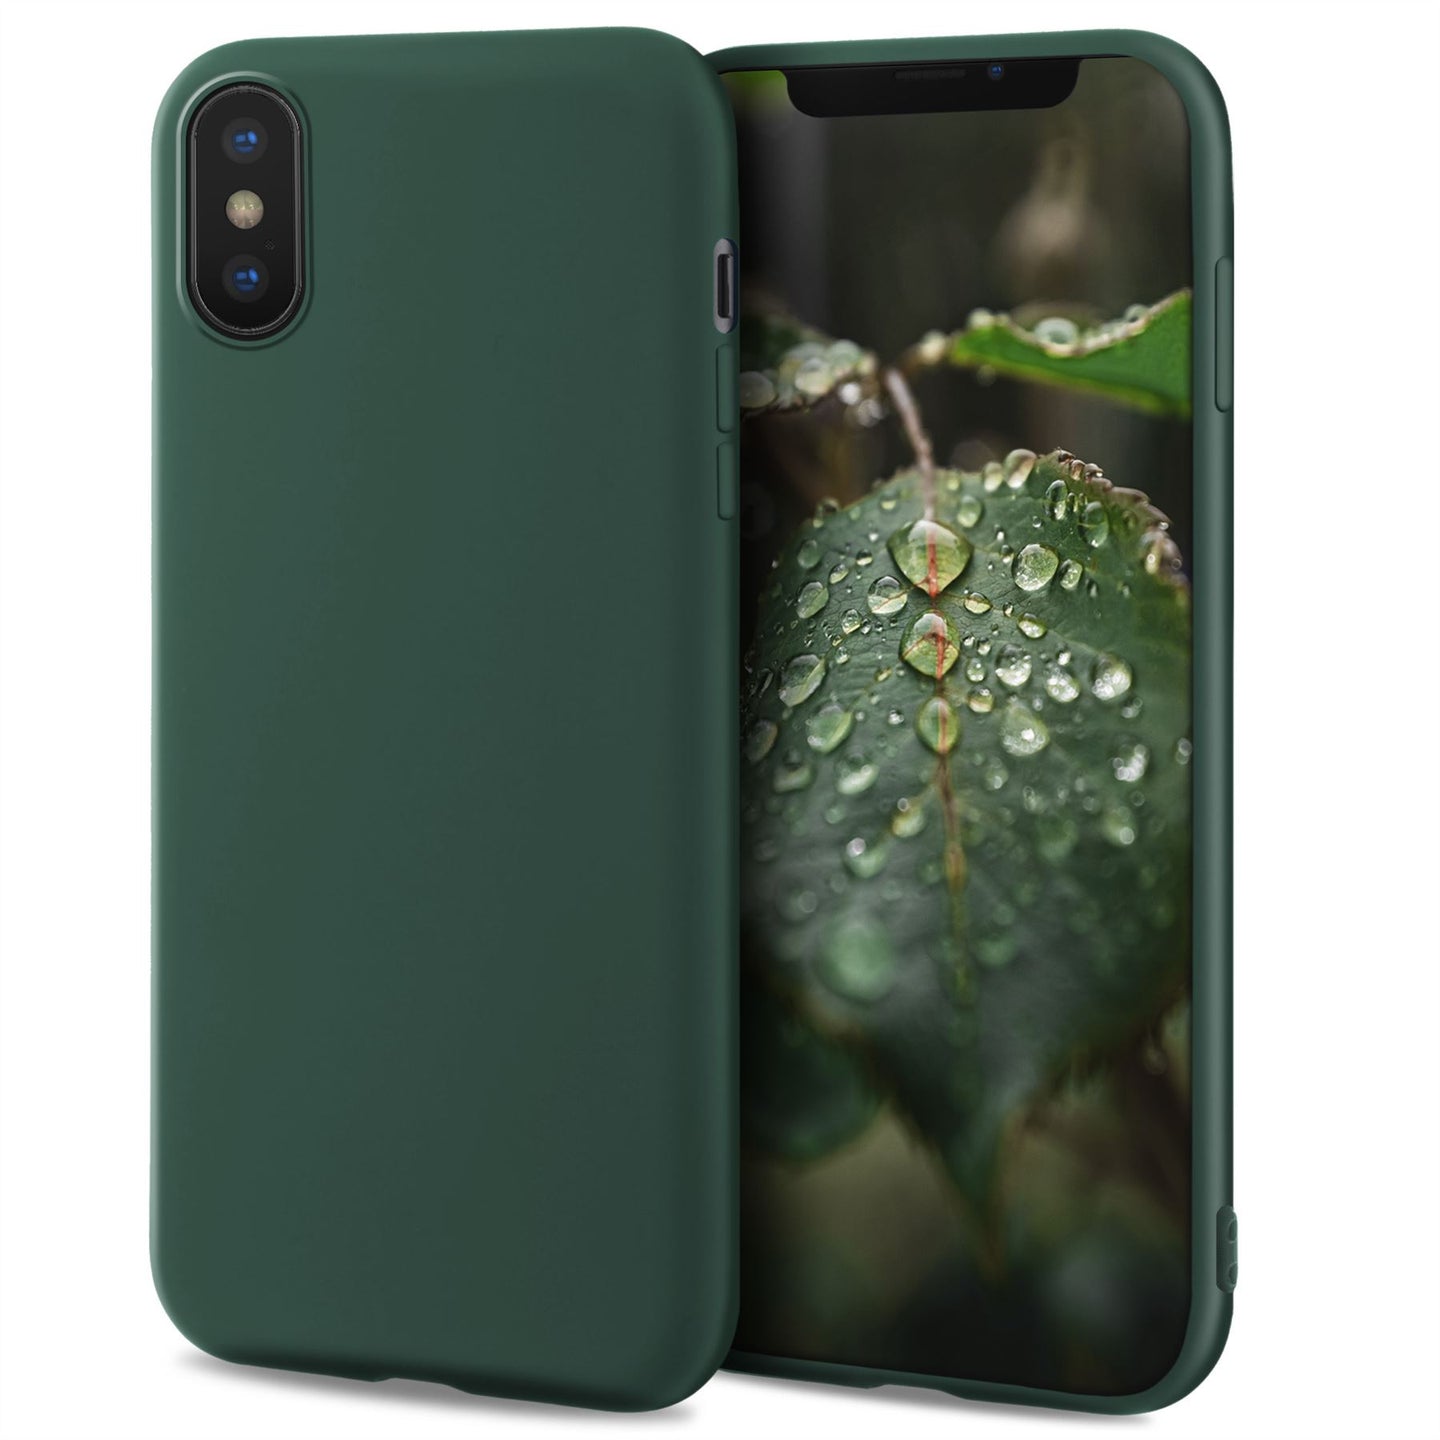 Moozy Lifestyle. Designed for iPhone X and iPhone XS Case, Dark Green - Liquid Silicone Cover with Matte Finish and Soft Microfiber Lining